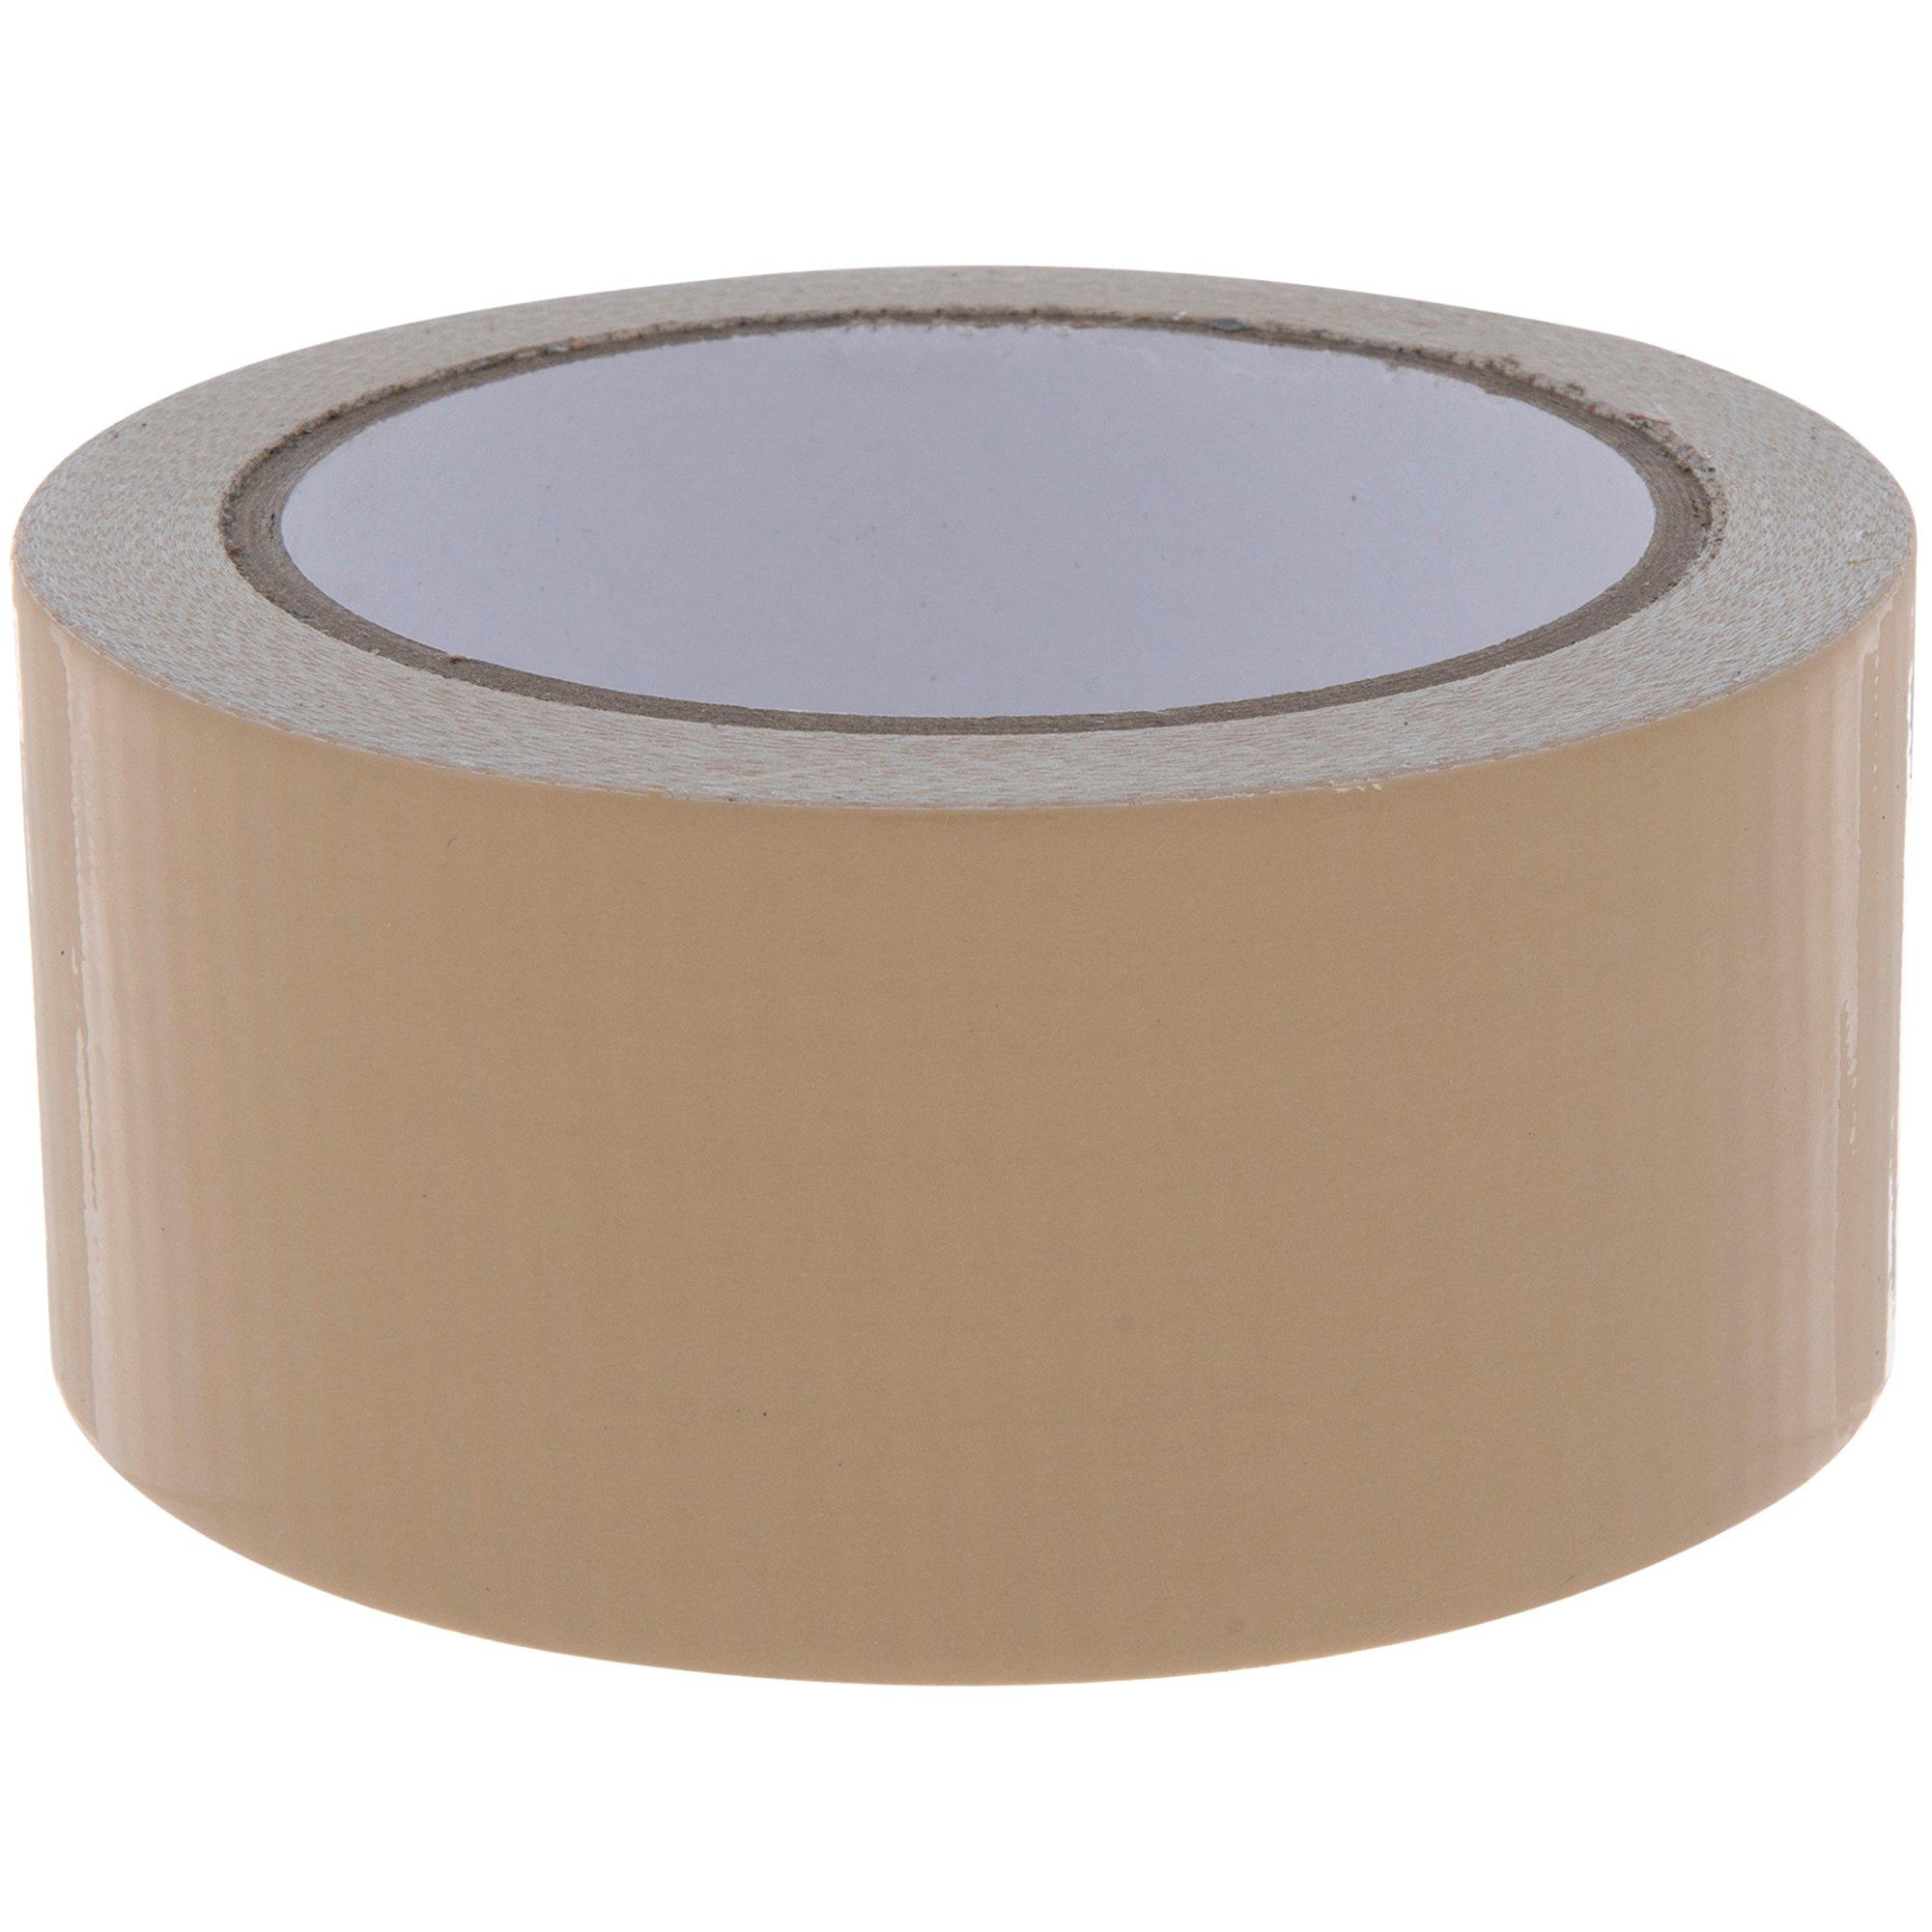 Duck Tape Heavy Duty Self-Adhesive Duct Tape, 1-7/8 Inches x 20 yards, Brown